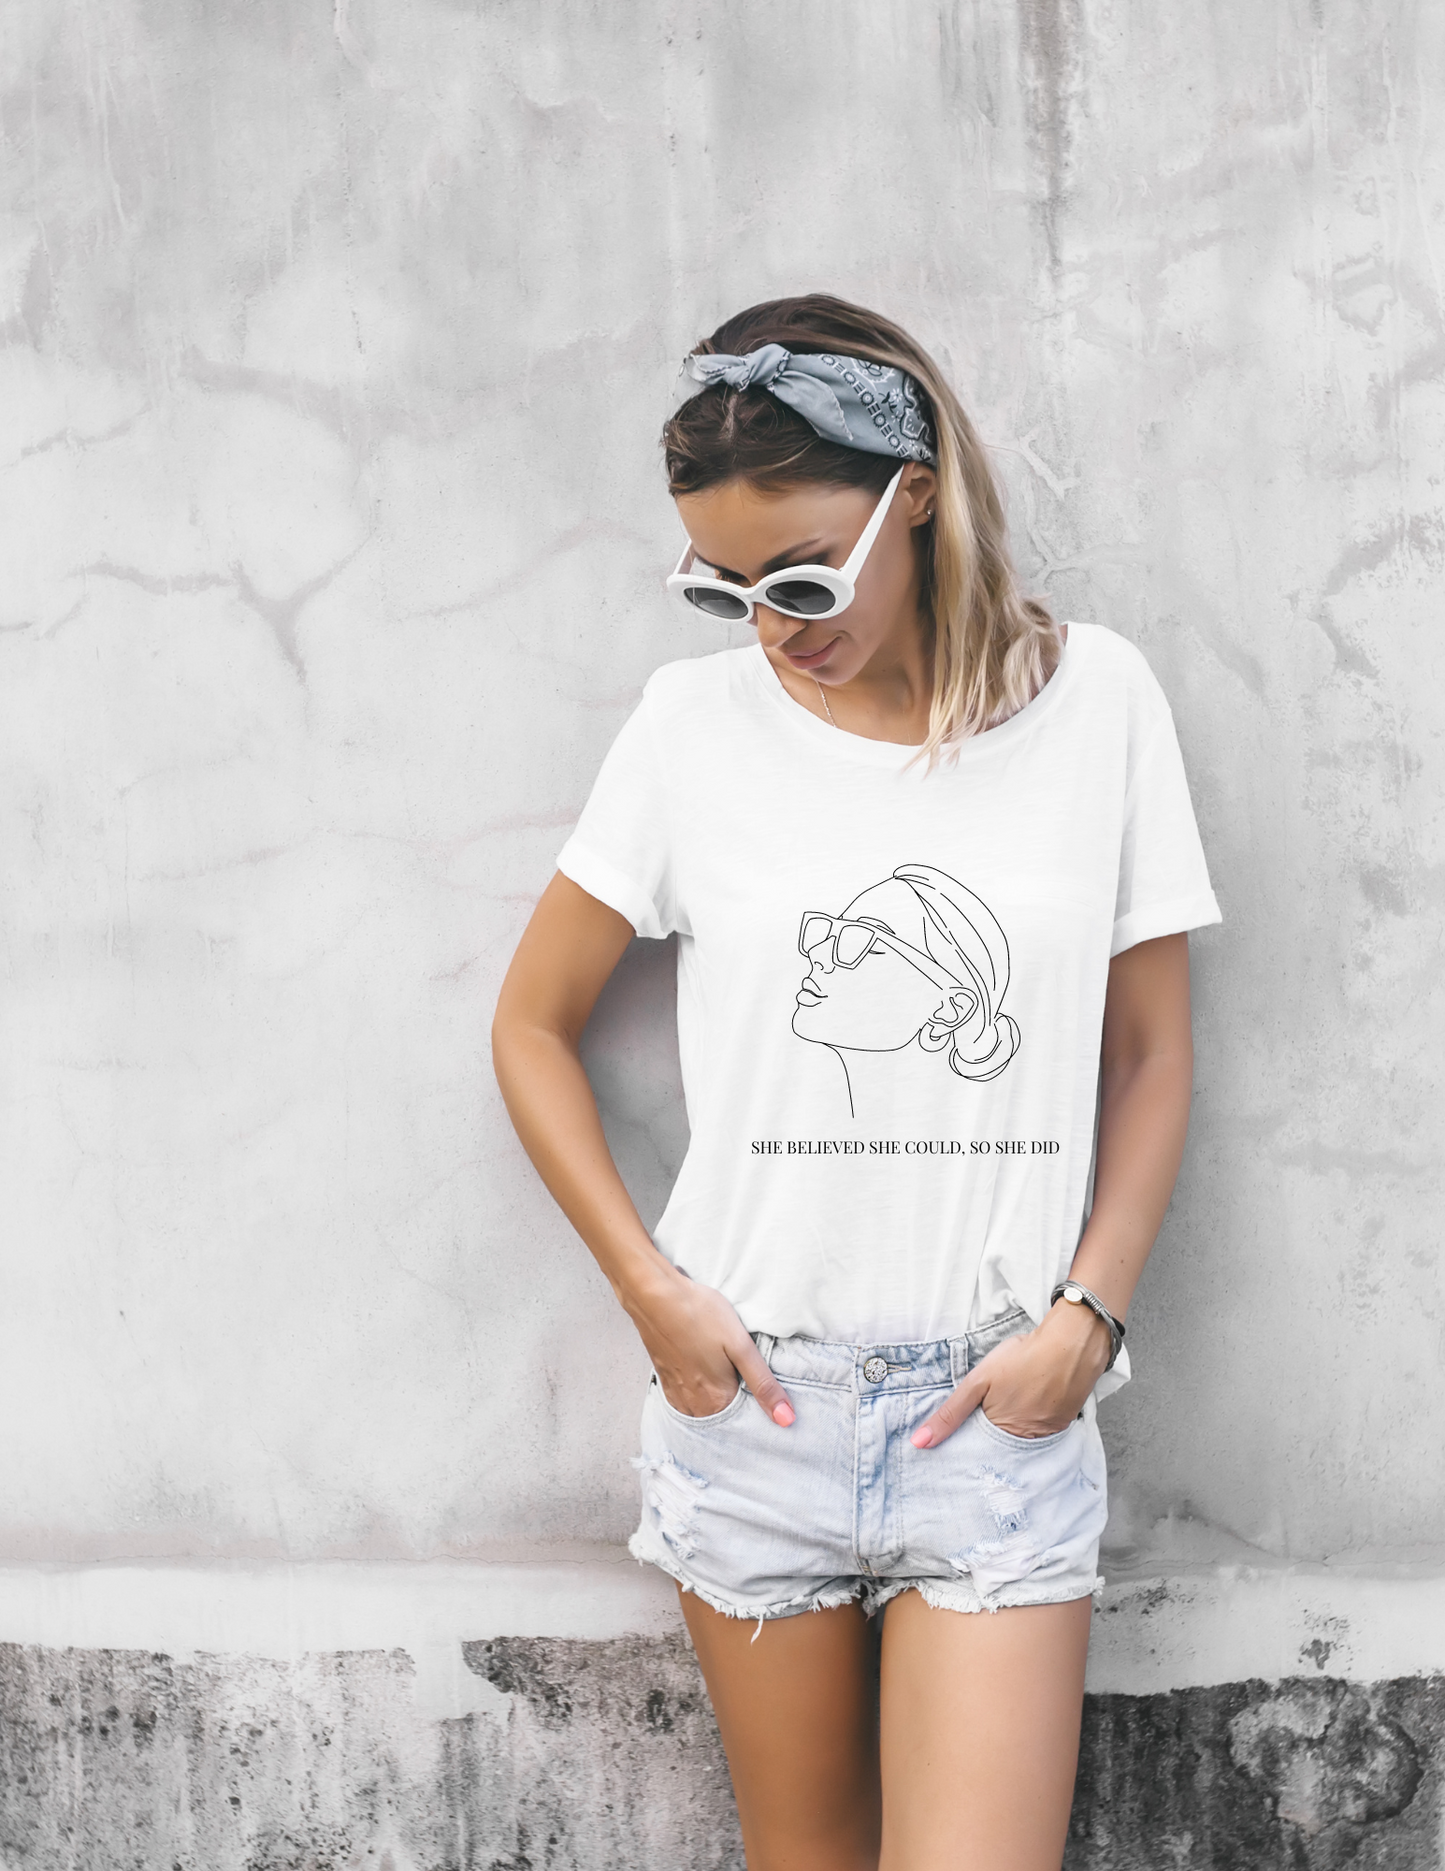 A white women with blond hair, wearing  a white t-shirt with a black outline of a women wearing sunglasses with her hair in a bun and earrings that has a quote she believed she could, so she did in a pair of jean shorts with sunglasses and headband.